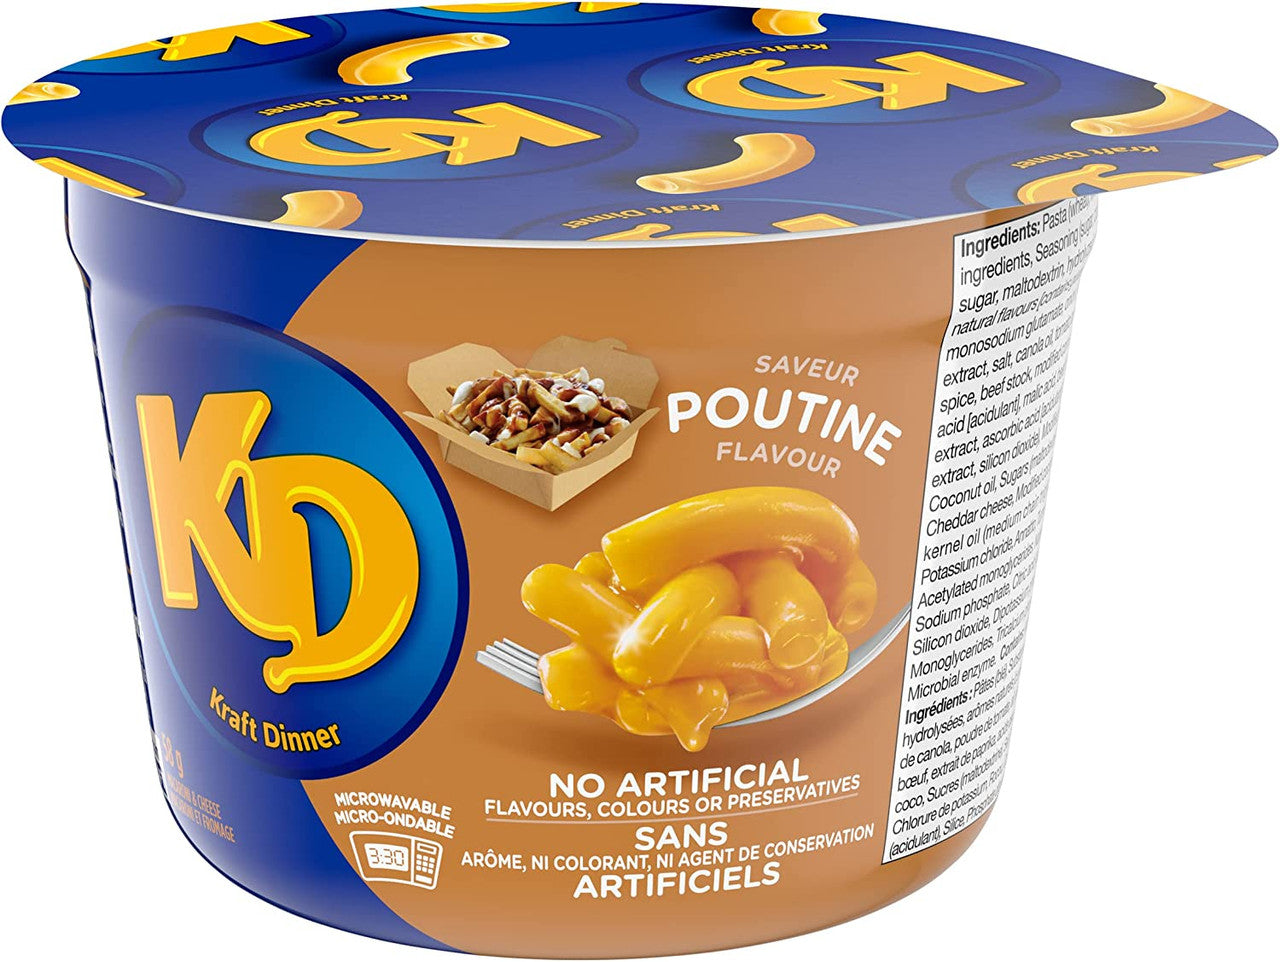 KD Kraft Dinner Poutine Flavor Snack Cups, 58g/2 oz. Cup (Imported from Canada)